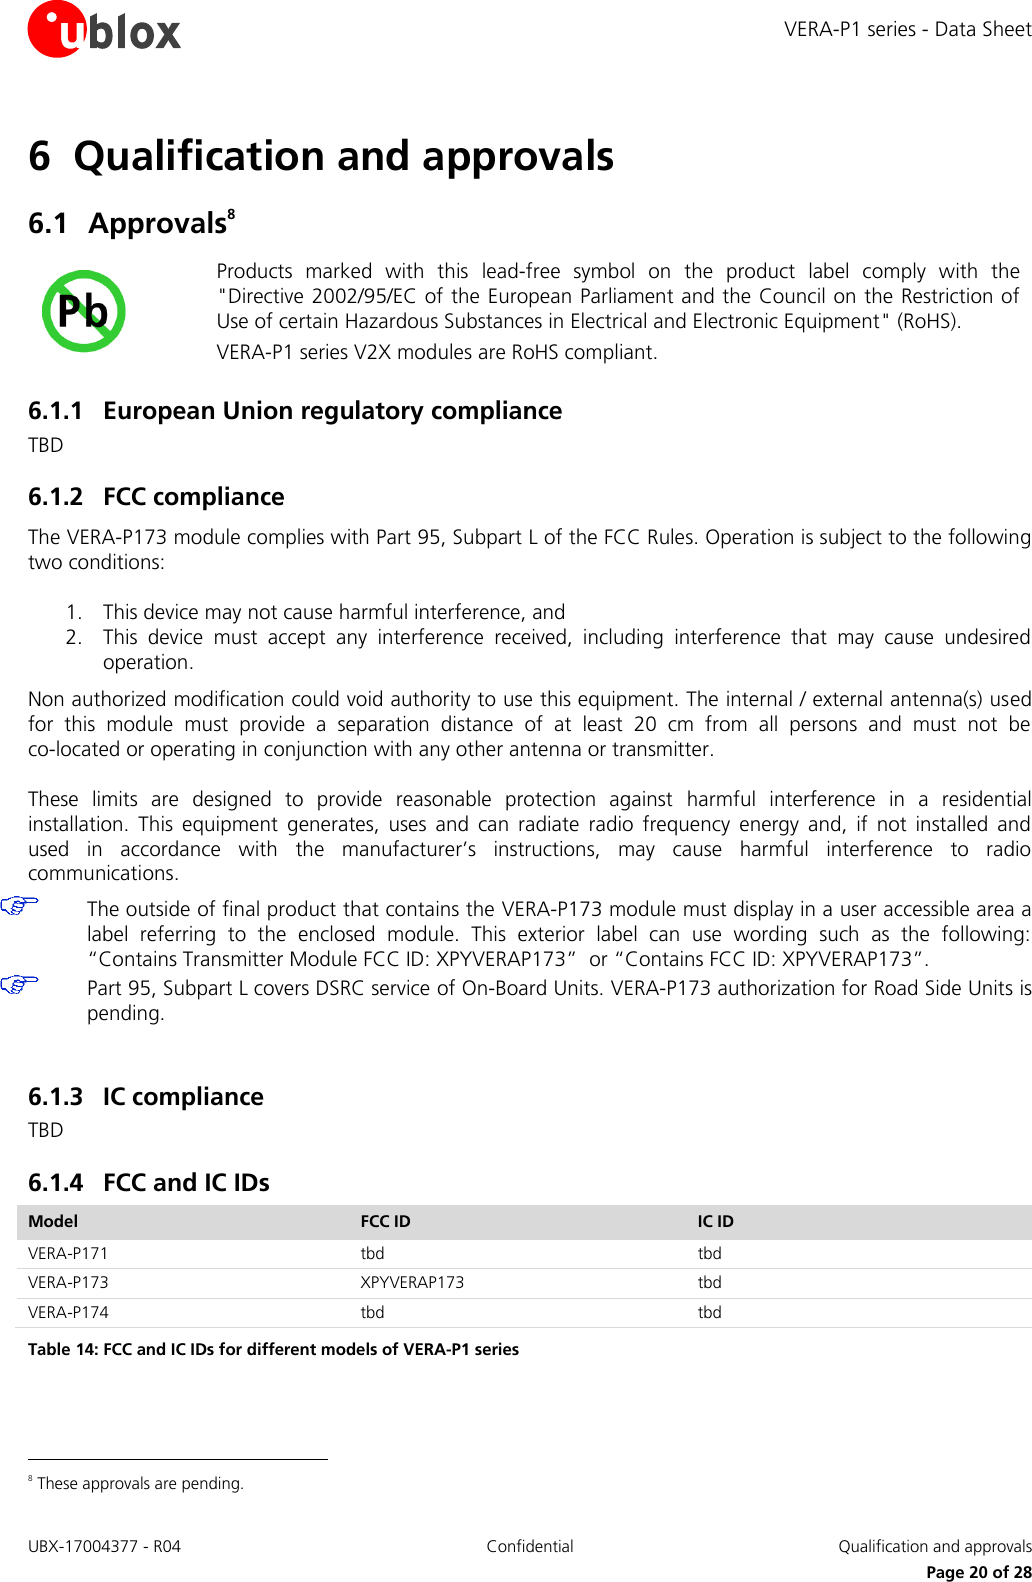 VERA-P1 series - Data Sheet UBX-17004377 - R04 Confidential  Qualification and approvals     Page 20 of 28 6 Qualification and approvals 6.1 Approvals8  Products  marked  with  this  lead-free  symbol  on  the  product  label  comply  with  the &quot;Directive 2002/95/EC of the European Parliament and the Council on the Restriction of Use of certain Hazardous Substances in Electrical and Electronic Equipment&quot; (RoHS). VERA-P1 series V2X modules are RoHS compliant. 6.1.1 European Union regulatory compliance TBD 6.1.2 FCC compliance The VERA-P173 module complies with Part 95, Subpart L of the FCC Rules. Operation is subject to the following two conditions: 1. This device may not cause harmful interference, and 2. This  device  must  accept  any  interference  received,  including  interference  that  may  cause  undesired operation. Non authorized modification could void authority to use this equipment. The internal / external antenna(s) used for  this  module  must  provide  a  separation  distance  of  at  least  20  cm  from  all  persons  and  must  not  be  co-located or operating in conjunction with any other antenna or transmitter. These  limits  are  designed  to  provide  reasonable  protection  against  harmful  interference  in  a  residential installation.  This  equipment  generates,  uses  and  can  radiate  radio  frequency  energy  and,  if  not  installed  and used  in  accordance  with  the  manufacturer’s  instructions,  may  cause  harmful  interference  to  radio communications.  The outside of final product that contains the VERA-P173 module must display in a user accessible area a label  referring  to  the  enclosed  module.  This  exterior  label  can  use  wording  such  as  the  following: “Contains Transmitter Module FCC ID: XPYVERAP173”  or “Contains FCC ID: XPYVERAP173”.  Part 95, Subpart L covers DSRC service of On-Board Units. VERA-P173 authorization for Road Side Units is pending.  6.1.3 IC compliance TBD 6.1.4 FCC and IC IDs Model FCC ID IC ID VERA-P171 tbd tbd VERA-P173 XPYVERAP173 tbd VERA-P174 tbd tbd Table 14: FCC and IC IDs for different models of VERA-P1 series                                                       8 These approvals are pending.  